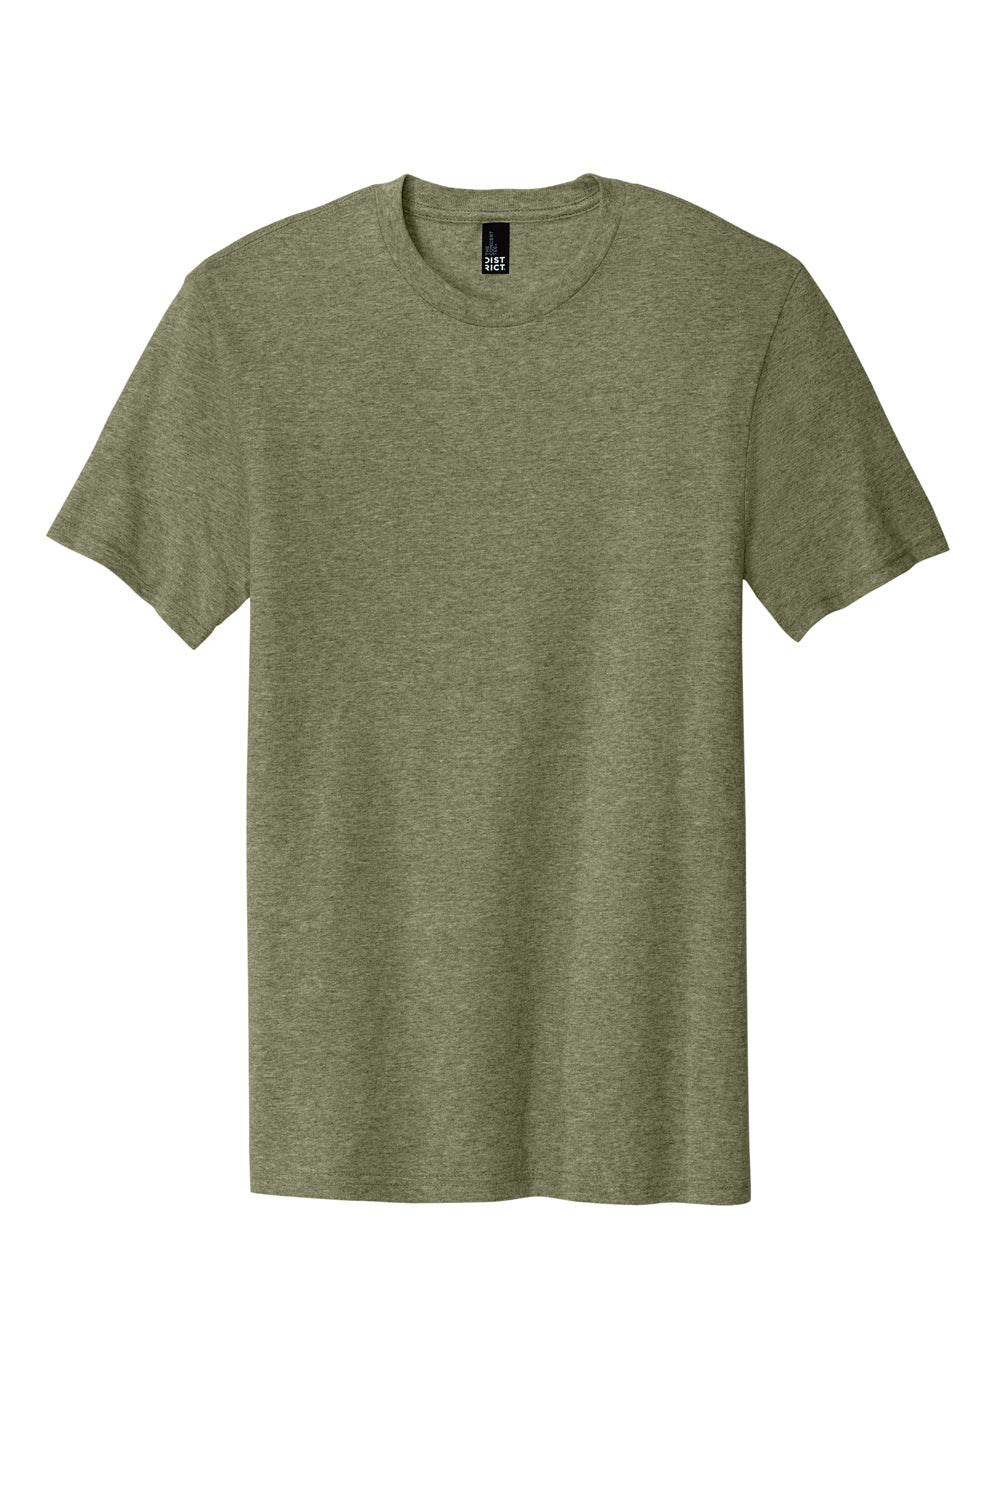 District DT5000 Mens The Concert Short Sleeve Crewneck T-Shirt Military Green Frost Flat Front